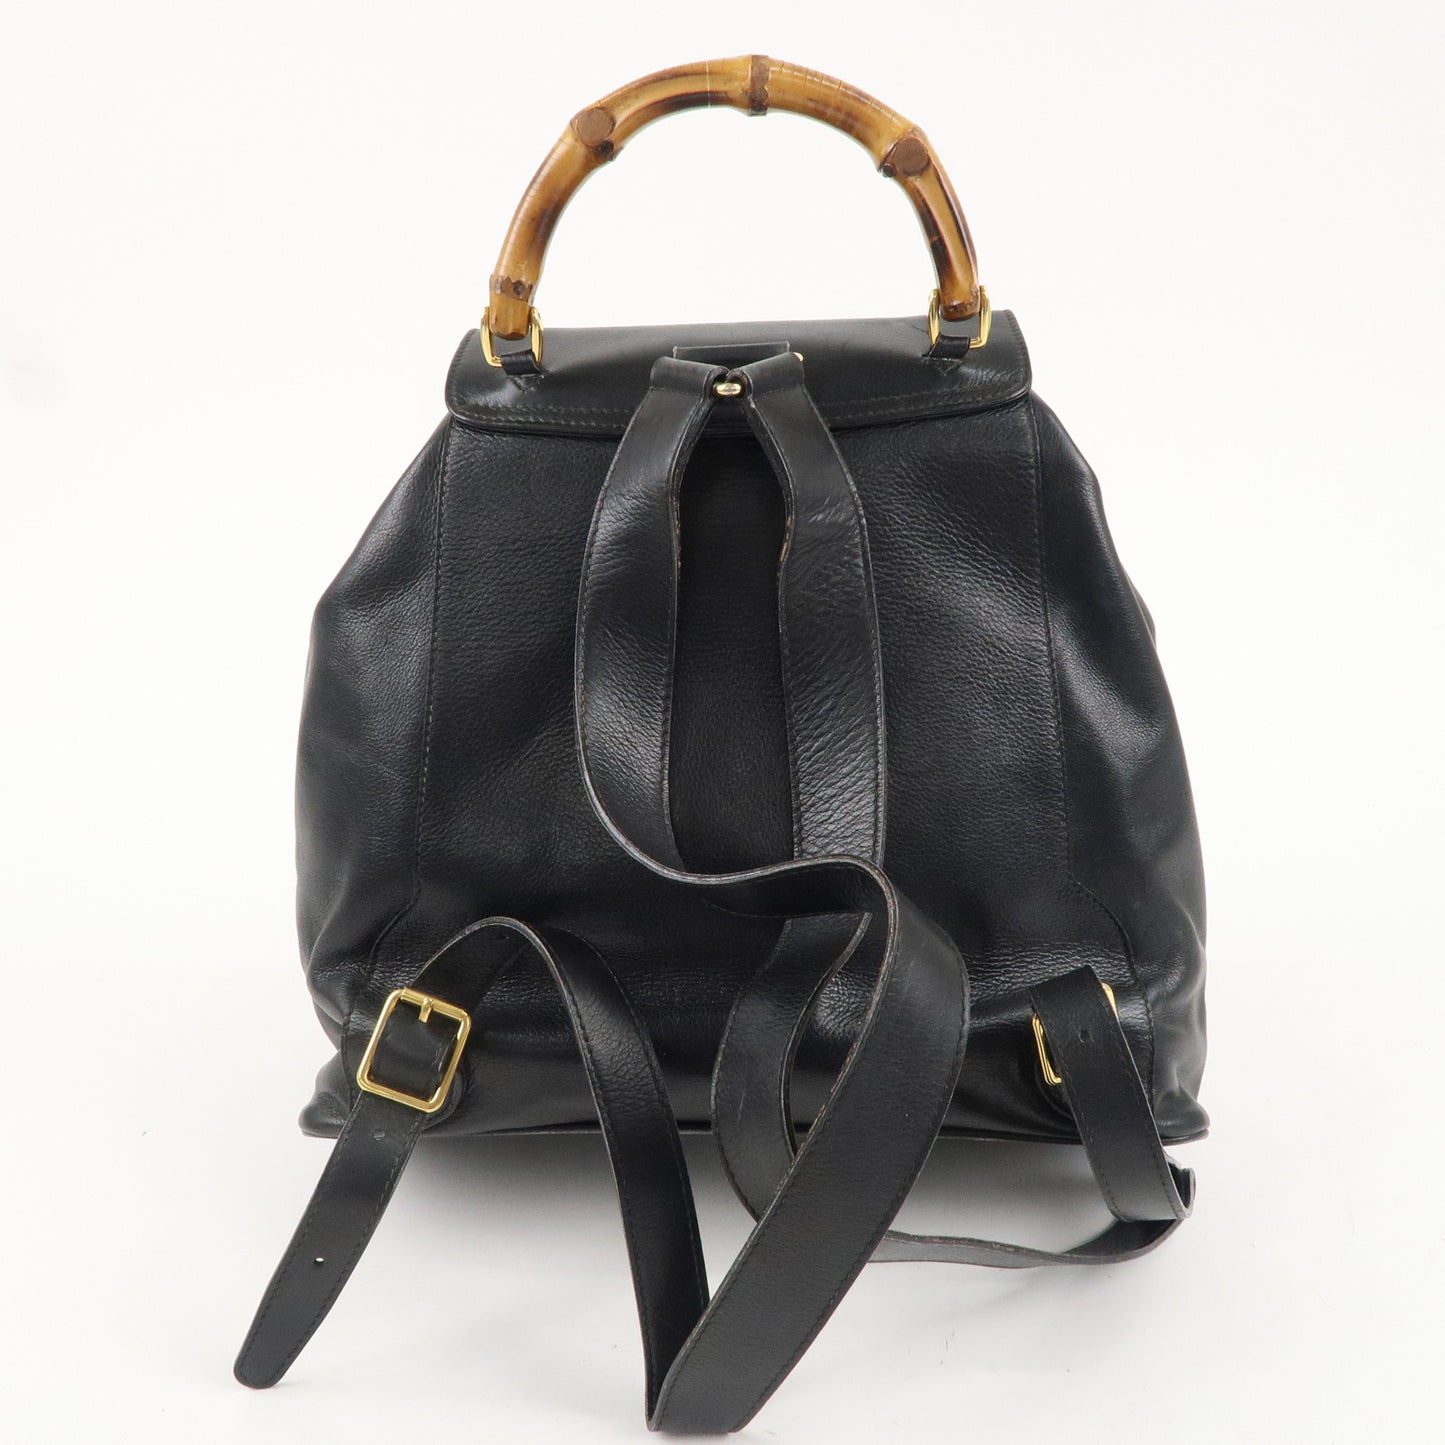 GUCCI Bamboo Leather Back Pack Black Ruck Sack 003.2058.0016